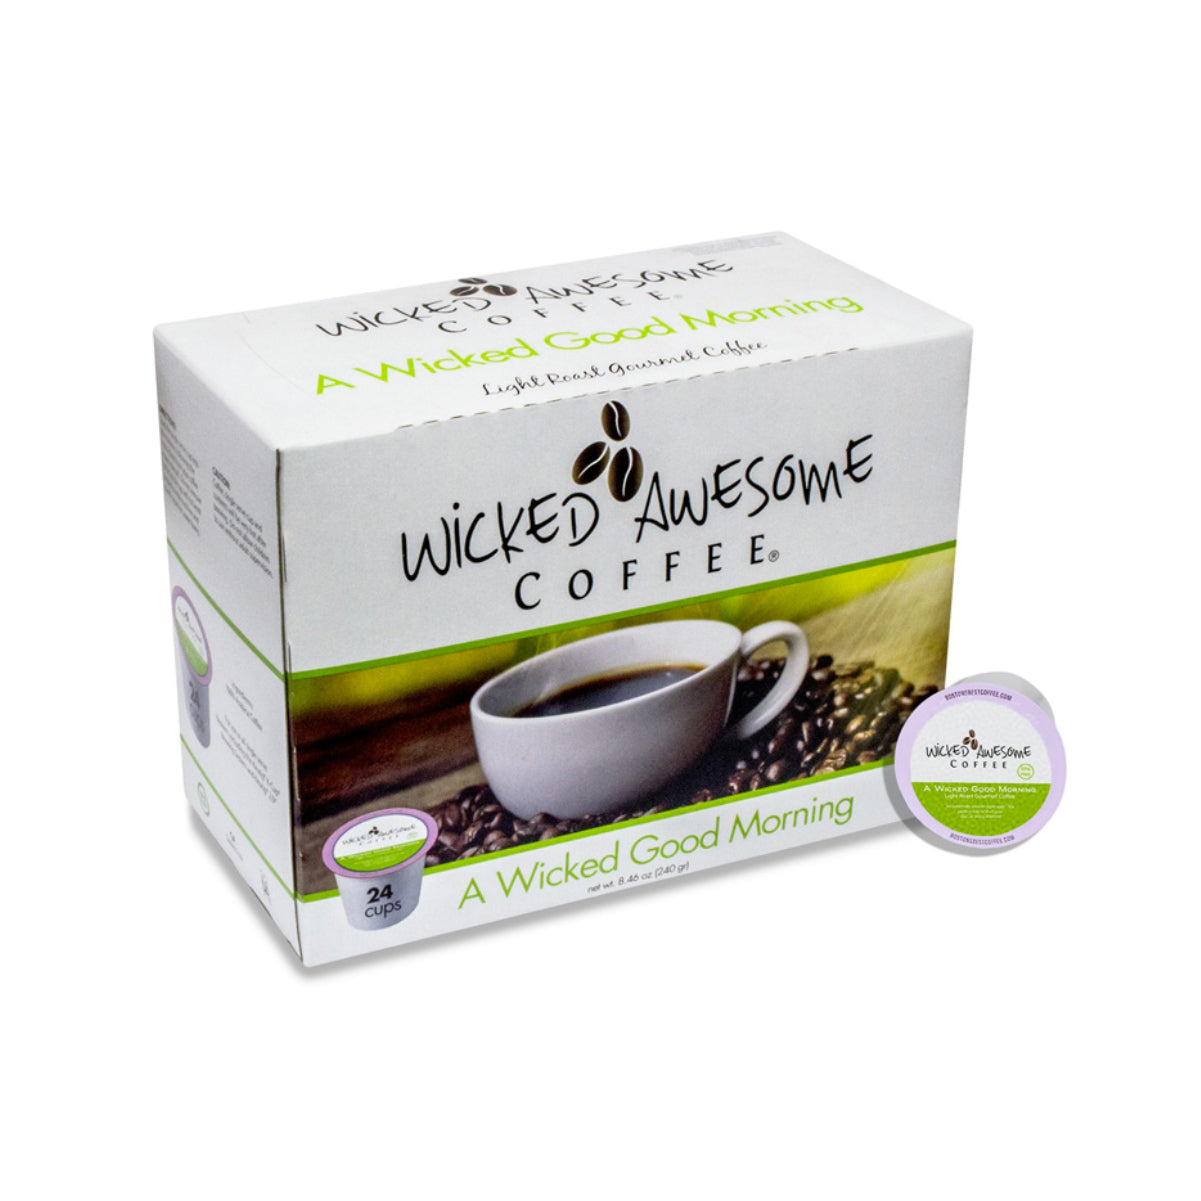 Wicked Awesome's Good Morning Single-Serve Coffee Pods